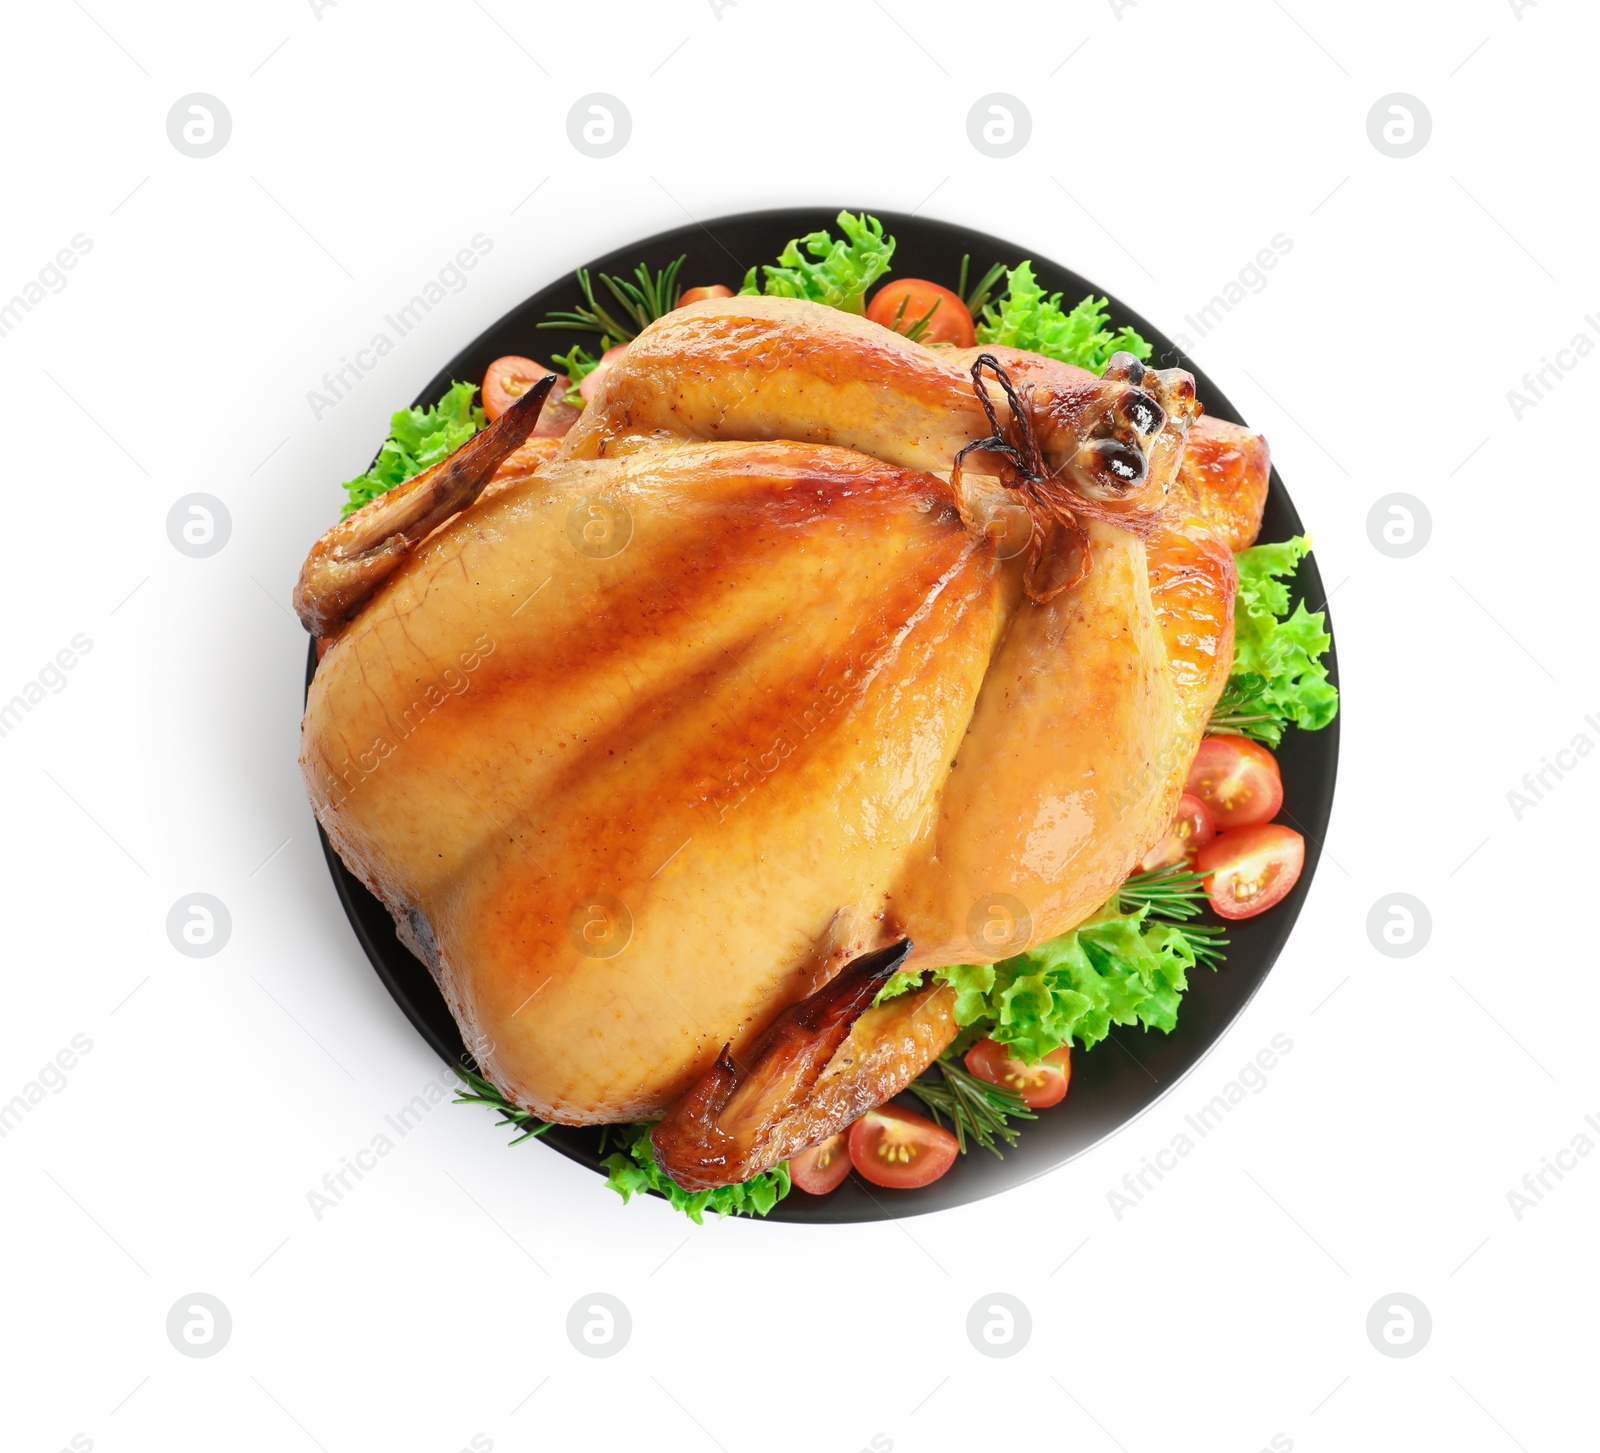 Photo of Platter of cooked turkey with garnish on white background, top view